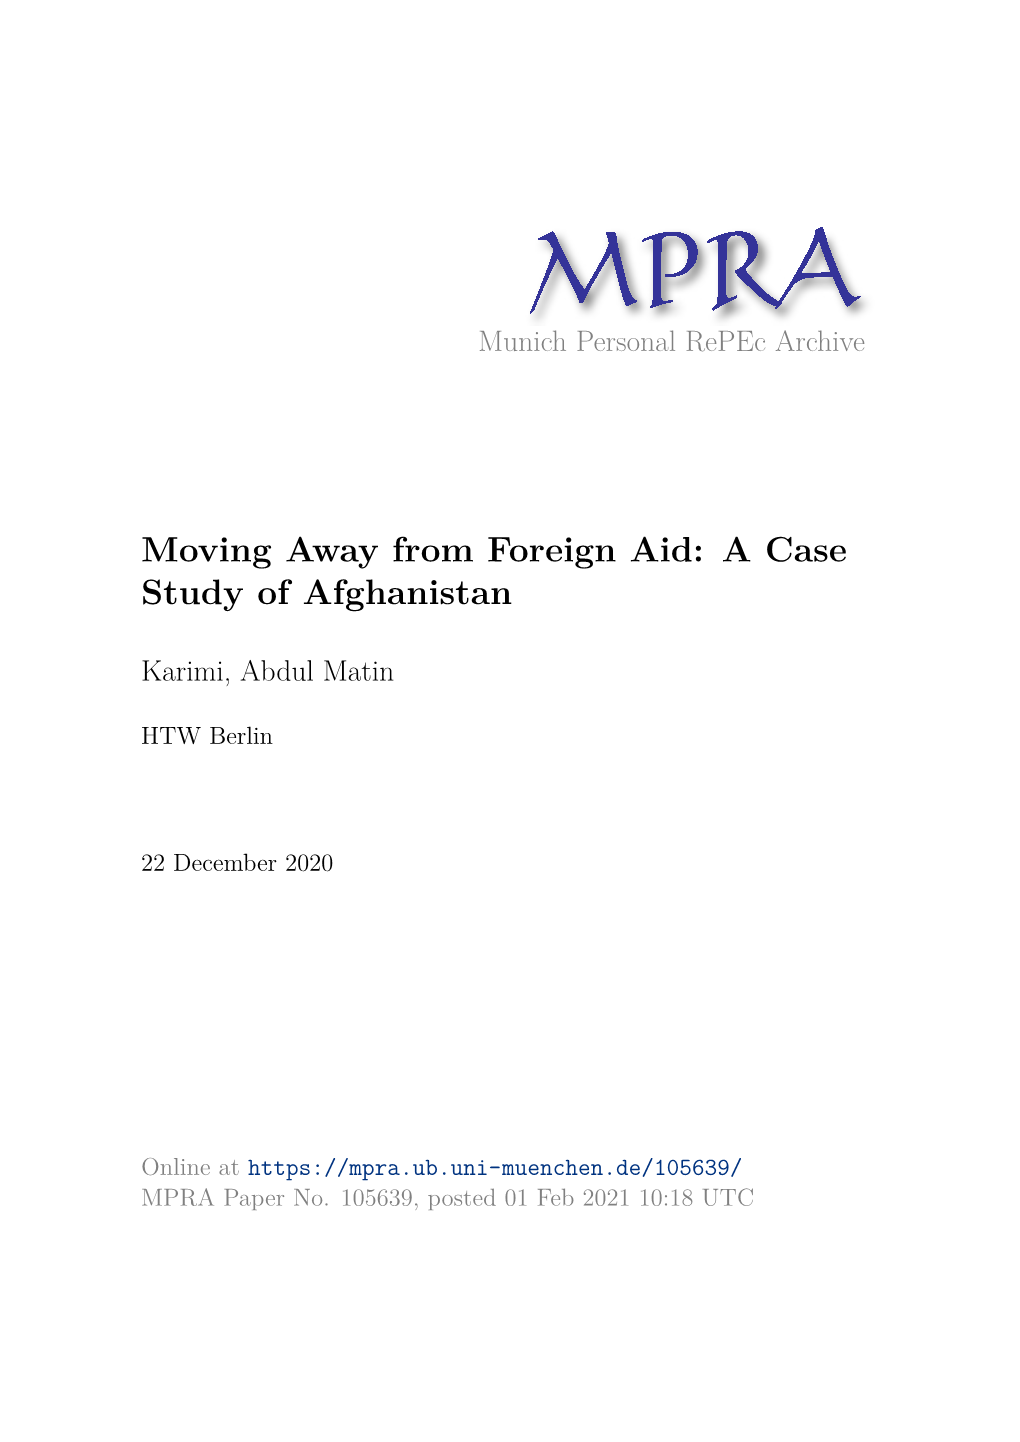 Moving Away from Foreign Aid: a Case Study of Afghanistan